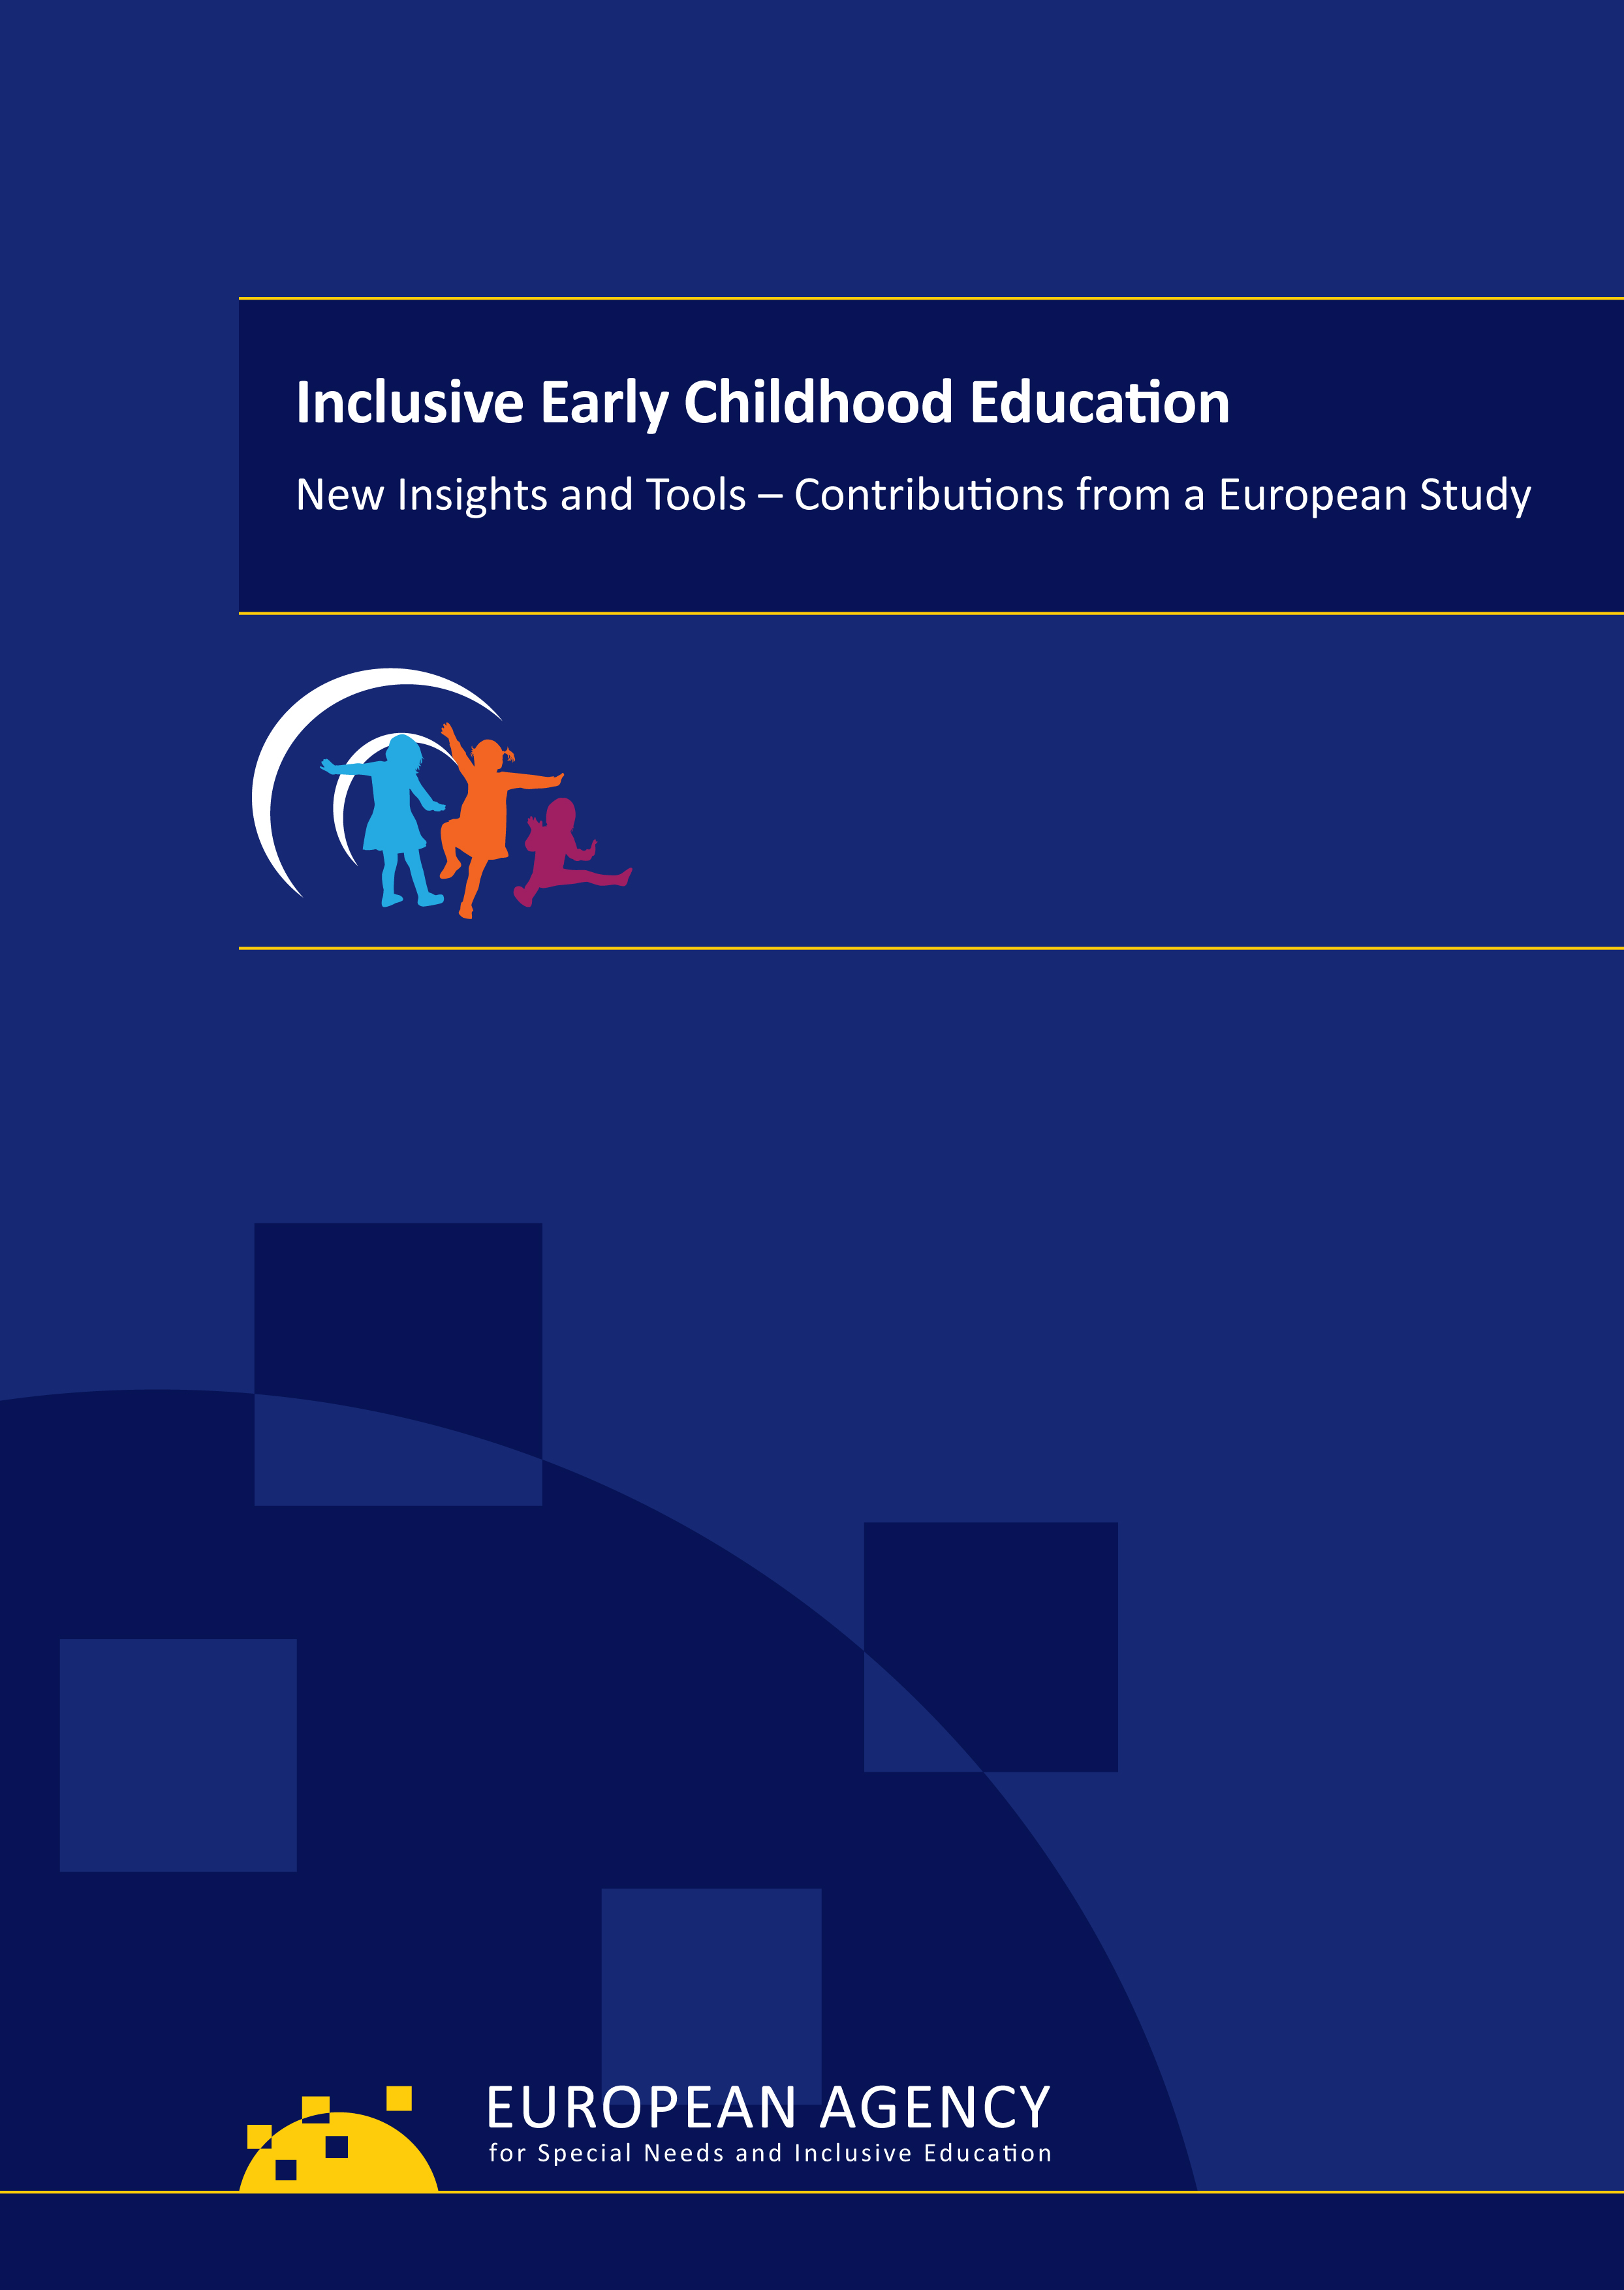 Inclusive Early Childhood Education: New Insights and Tools – Contributions from a European Study